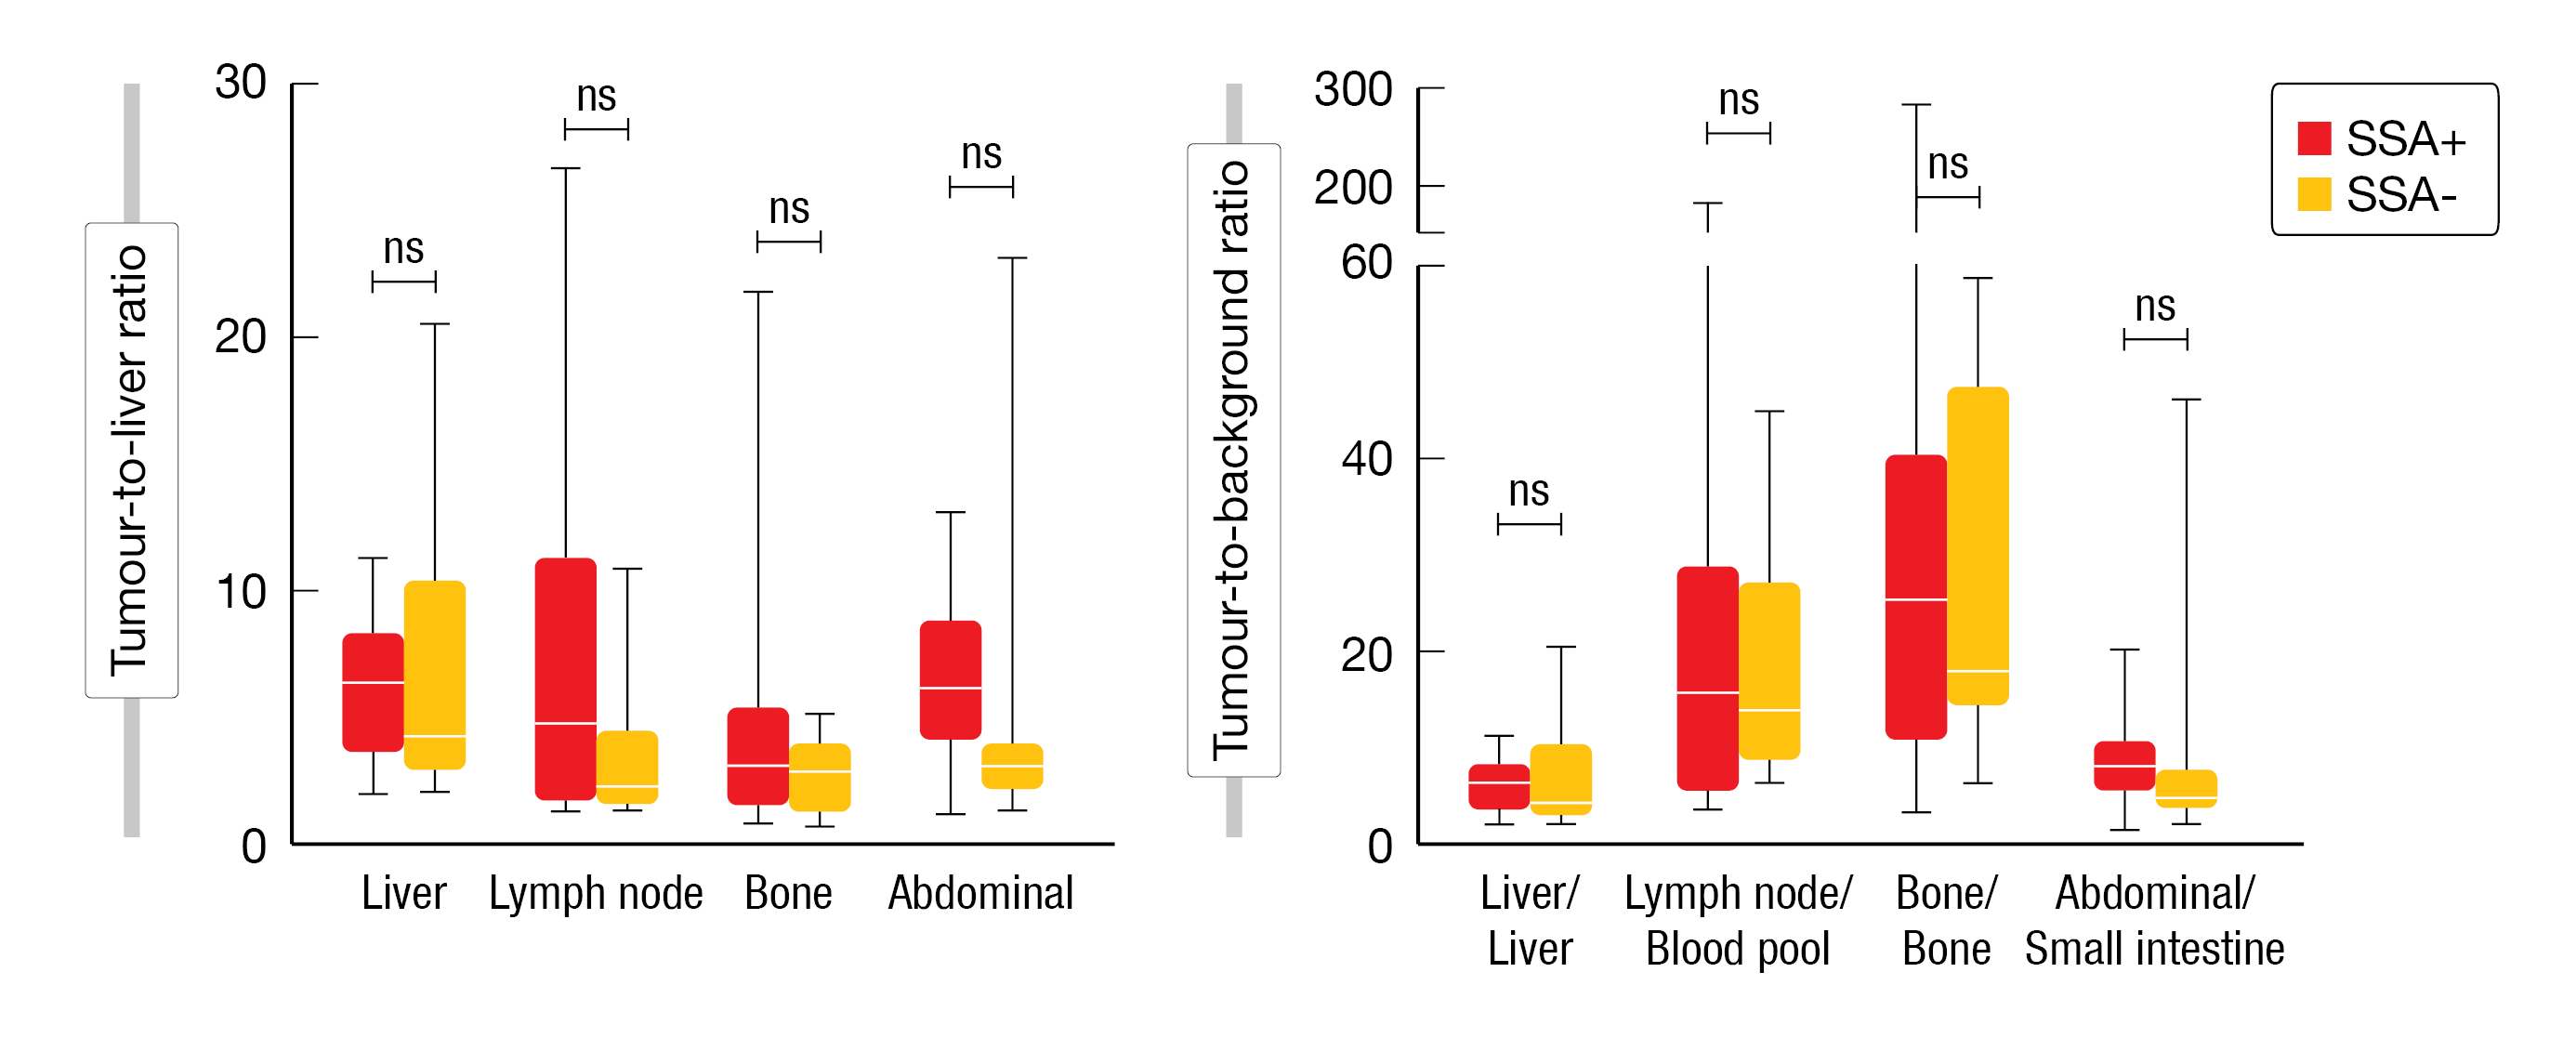 Figure 1: Box-plots representing the tumor-to-liver ratio (A) and tumor-to-background ratio (B) in GEP-NET patients based on whether they previously received SSA for treatment.